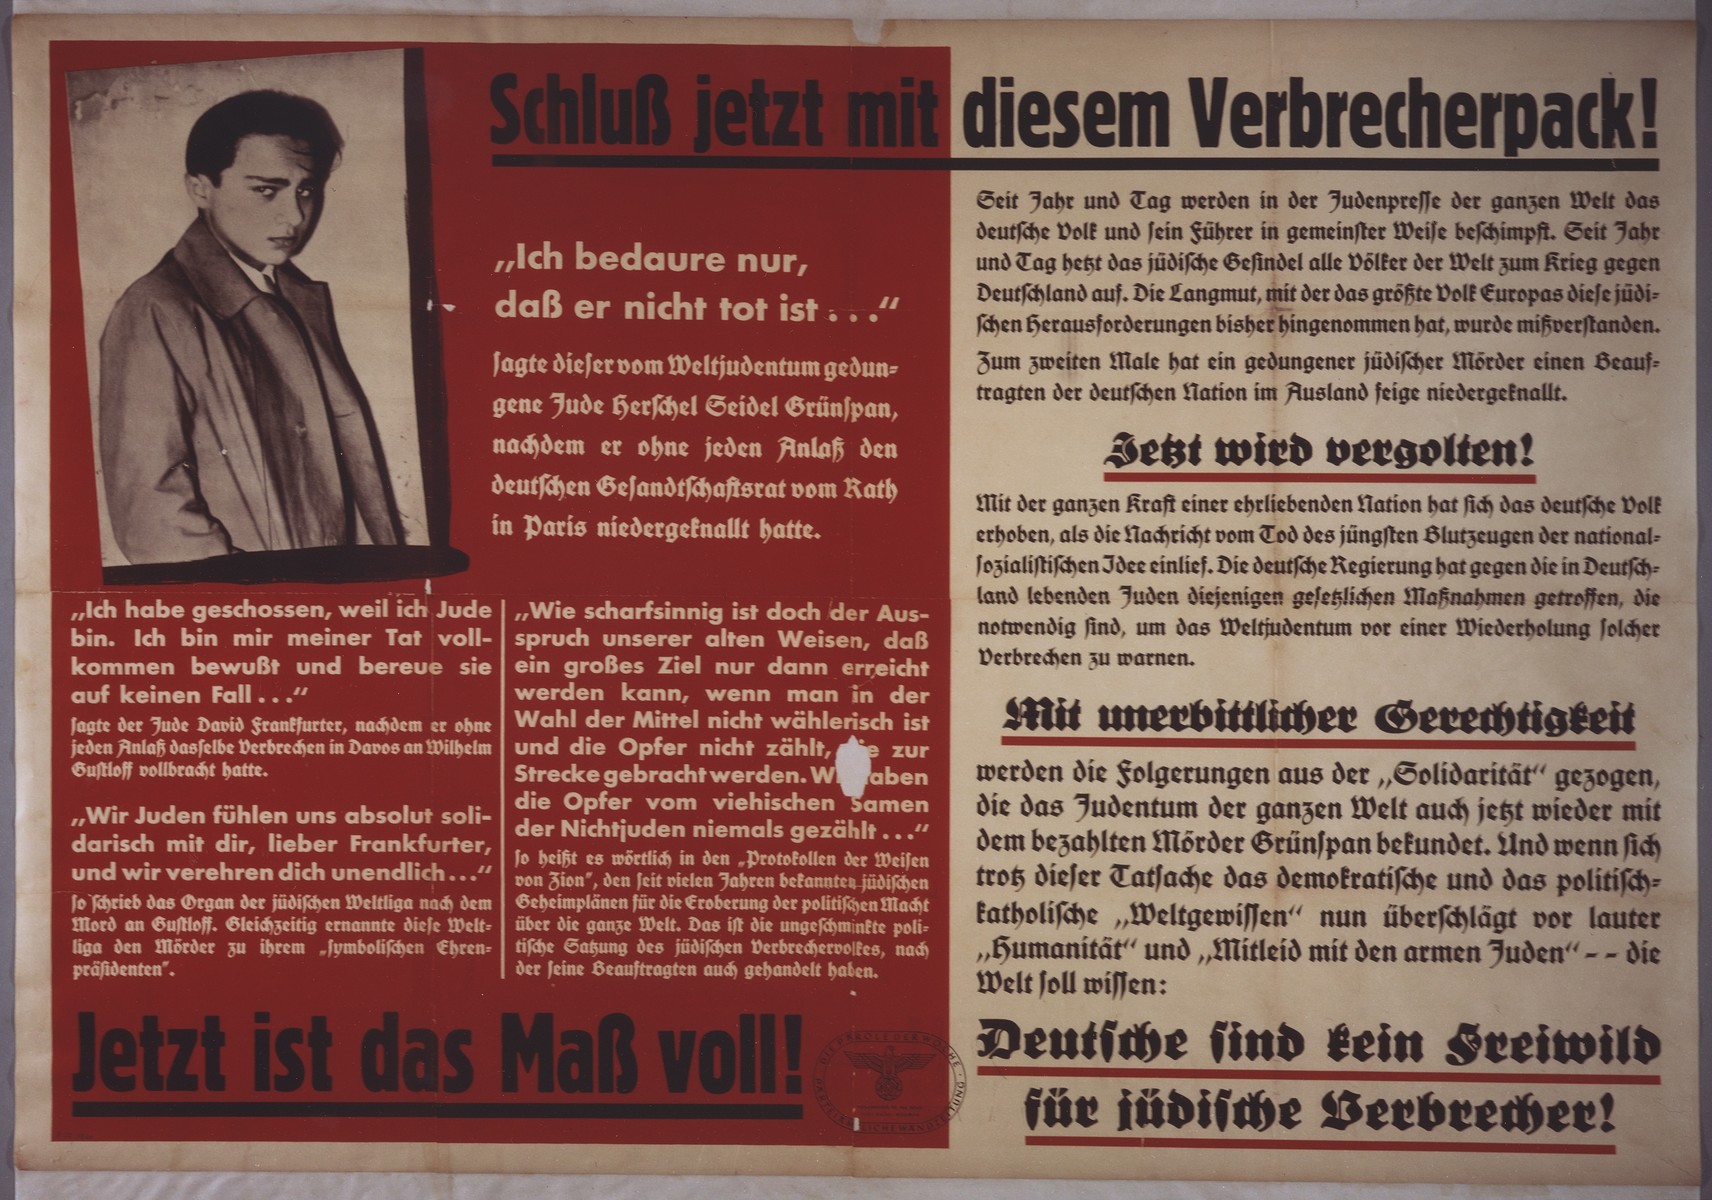 Nazi propaganda poster bearing a photograph of Herschel Grynzspan, titled, "Enough of this pack of criminals!--Germans are not 'fair game' for Jewish criminals!--Now the cup is full!"  The poster warns of revenge to be taken upon the Jewish people for their purported crimes.